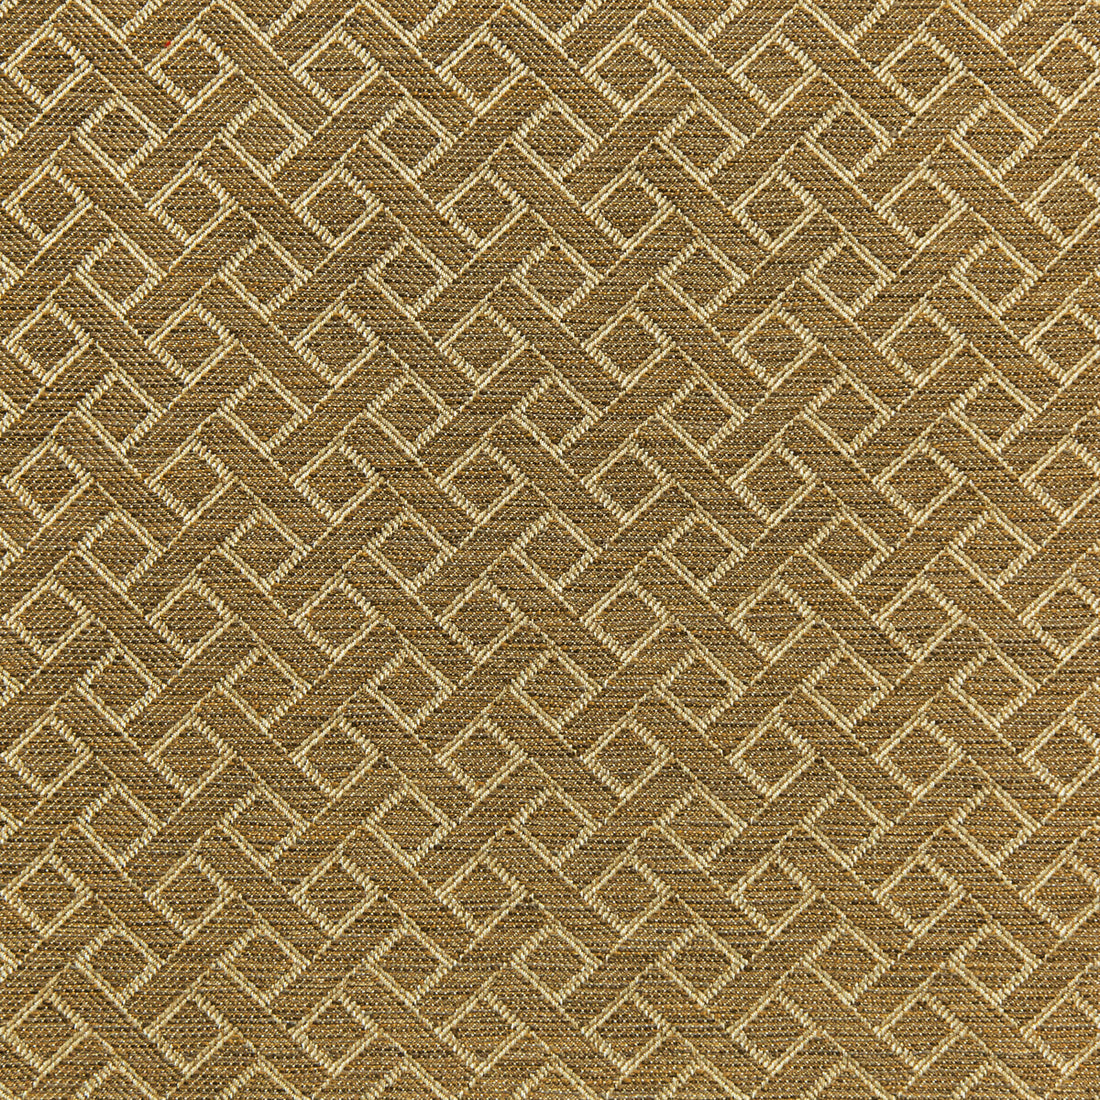 Maldon Weave fabric in java color - pattern 2020102.166.0 - by Lee Jofa in the Linford Weaves collection